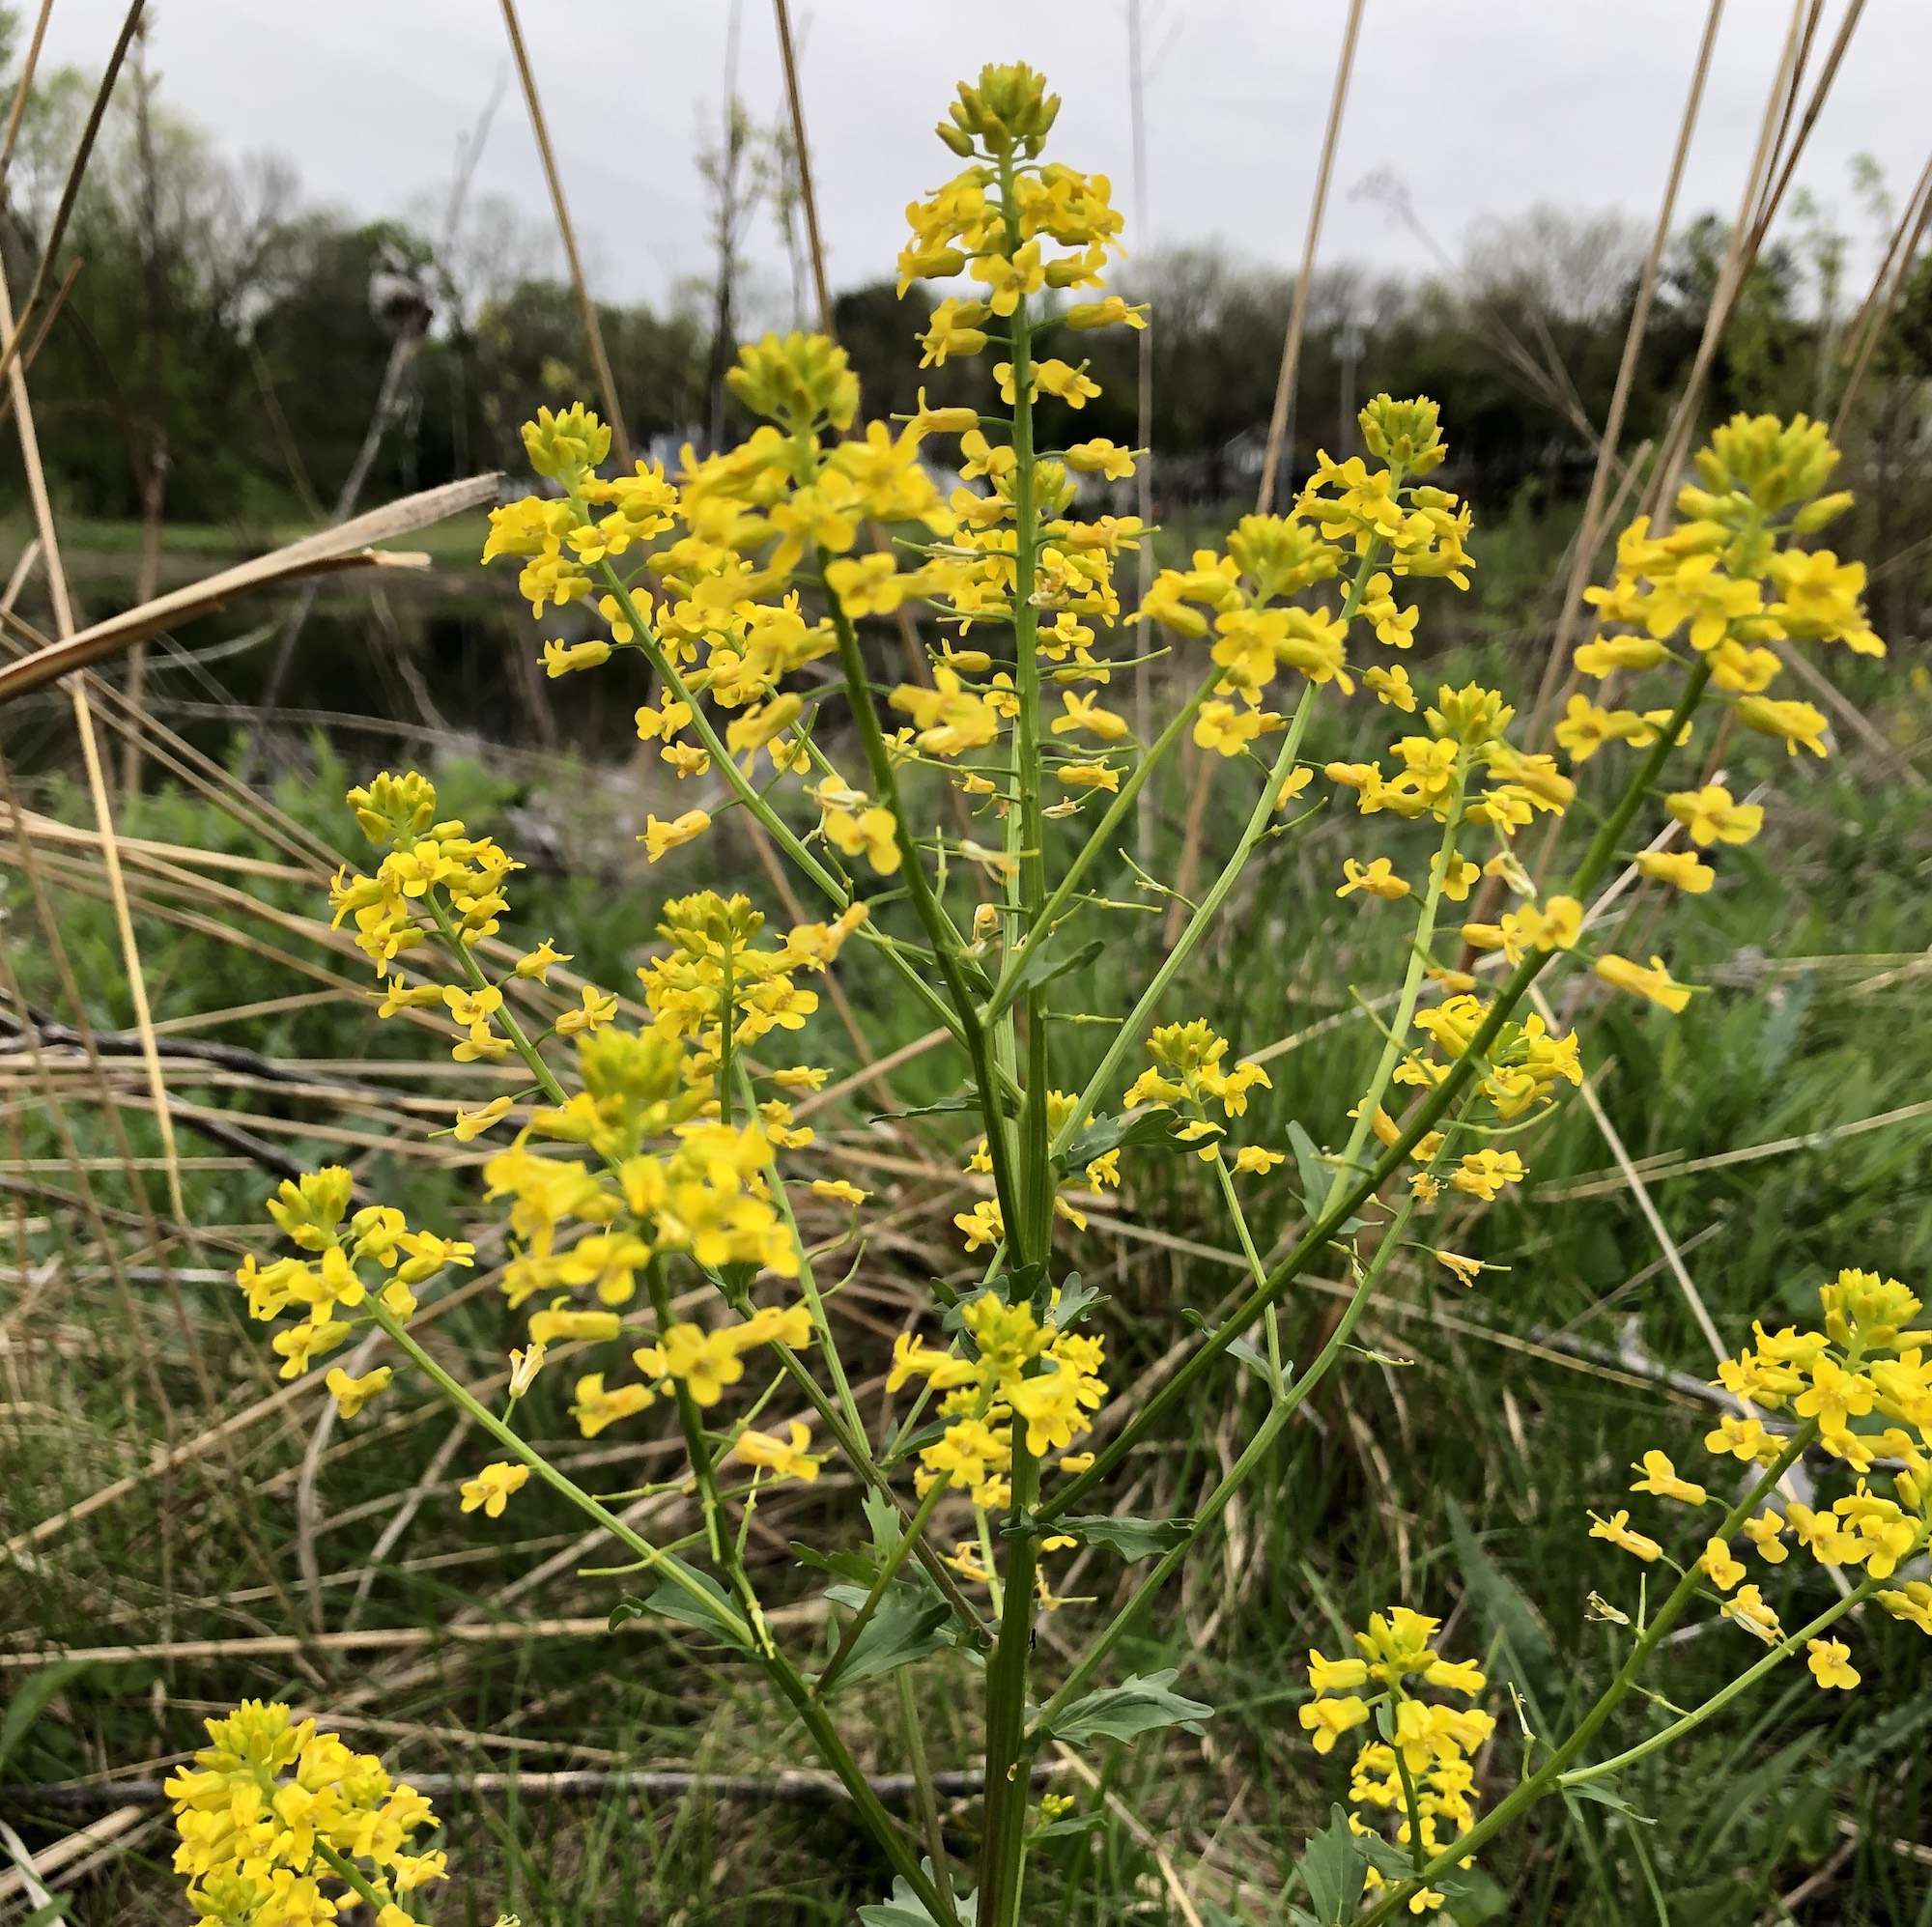 Garden Yellow Rocket by Marion Dunn Pond on May 17, 2019.